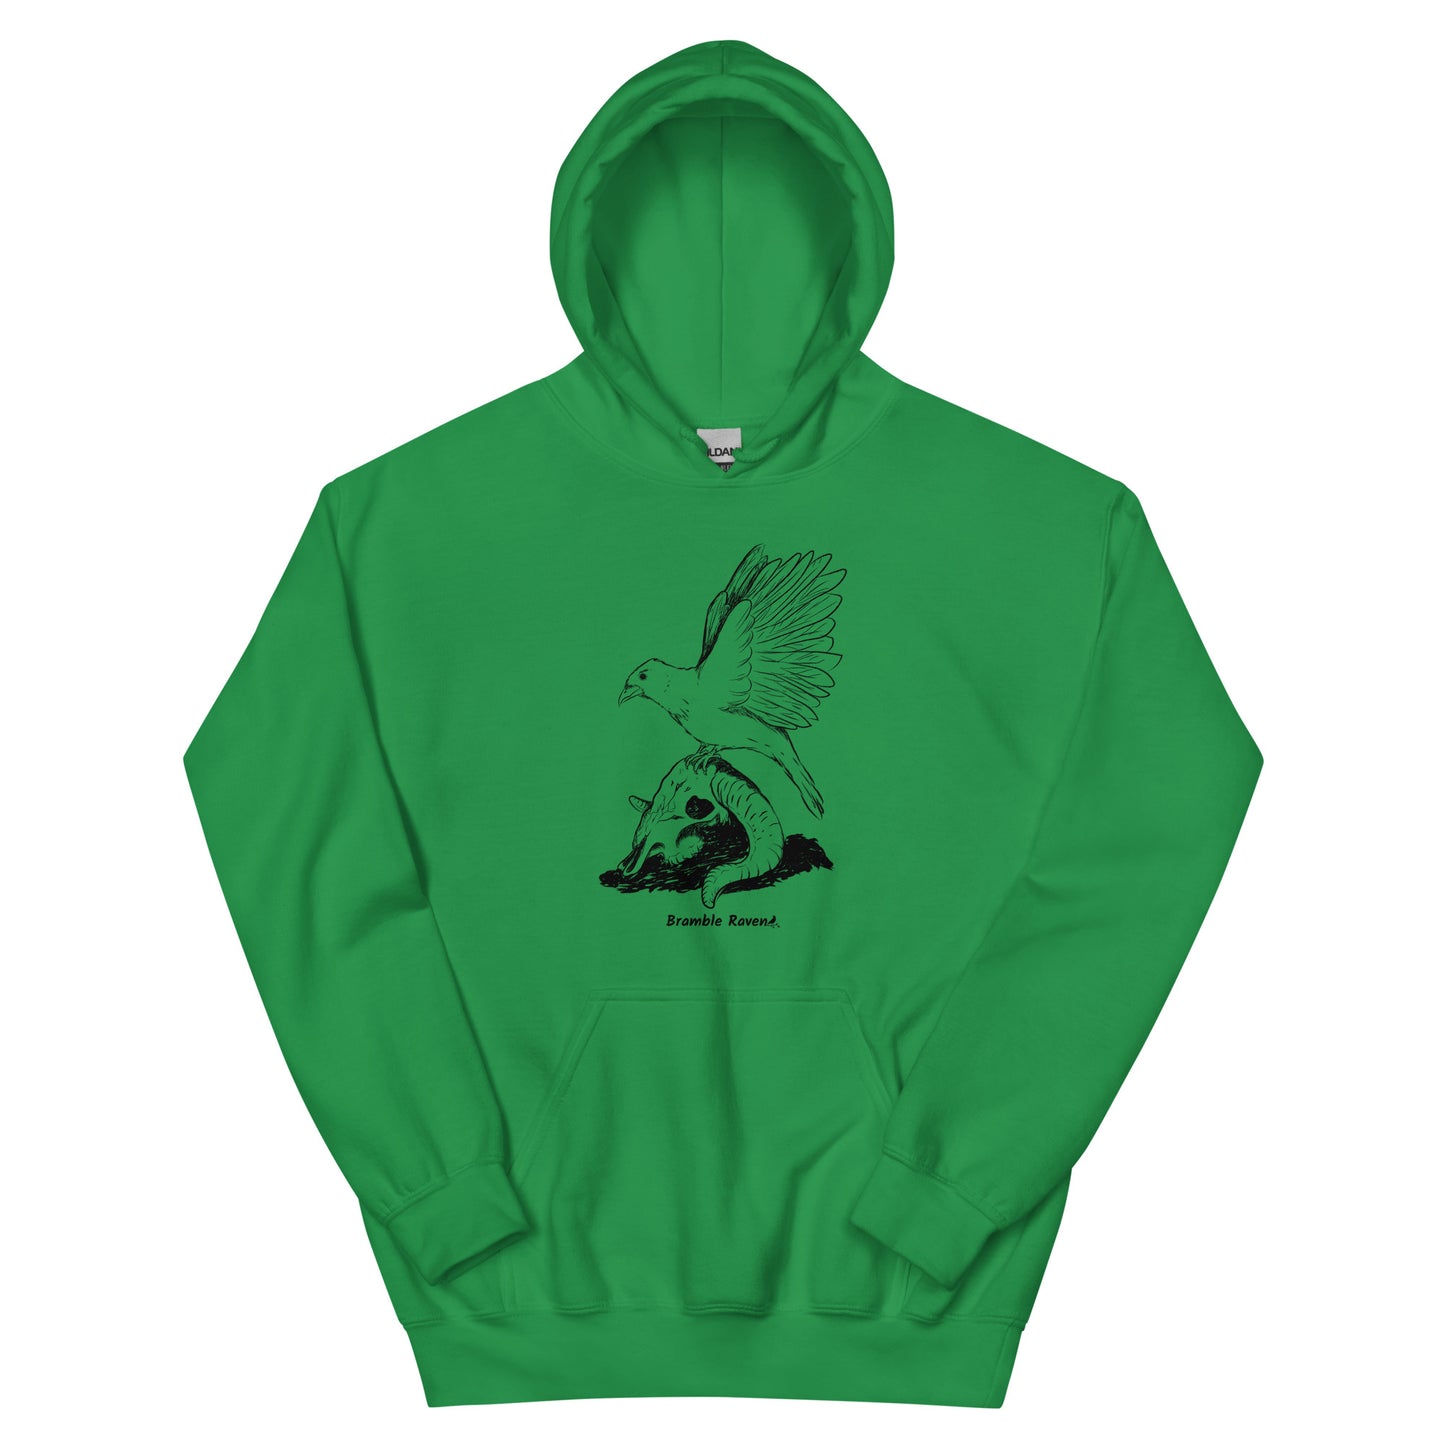 Irish green colored unisex Reflections hoodie. Features image of a crow with wings outstretched sitting on a sheep skull.  Has a front pouch pocket and double lined hood.